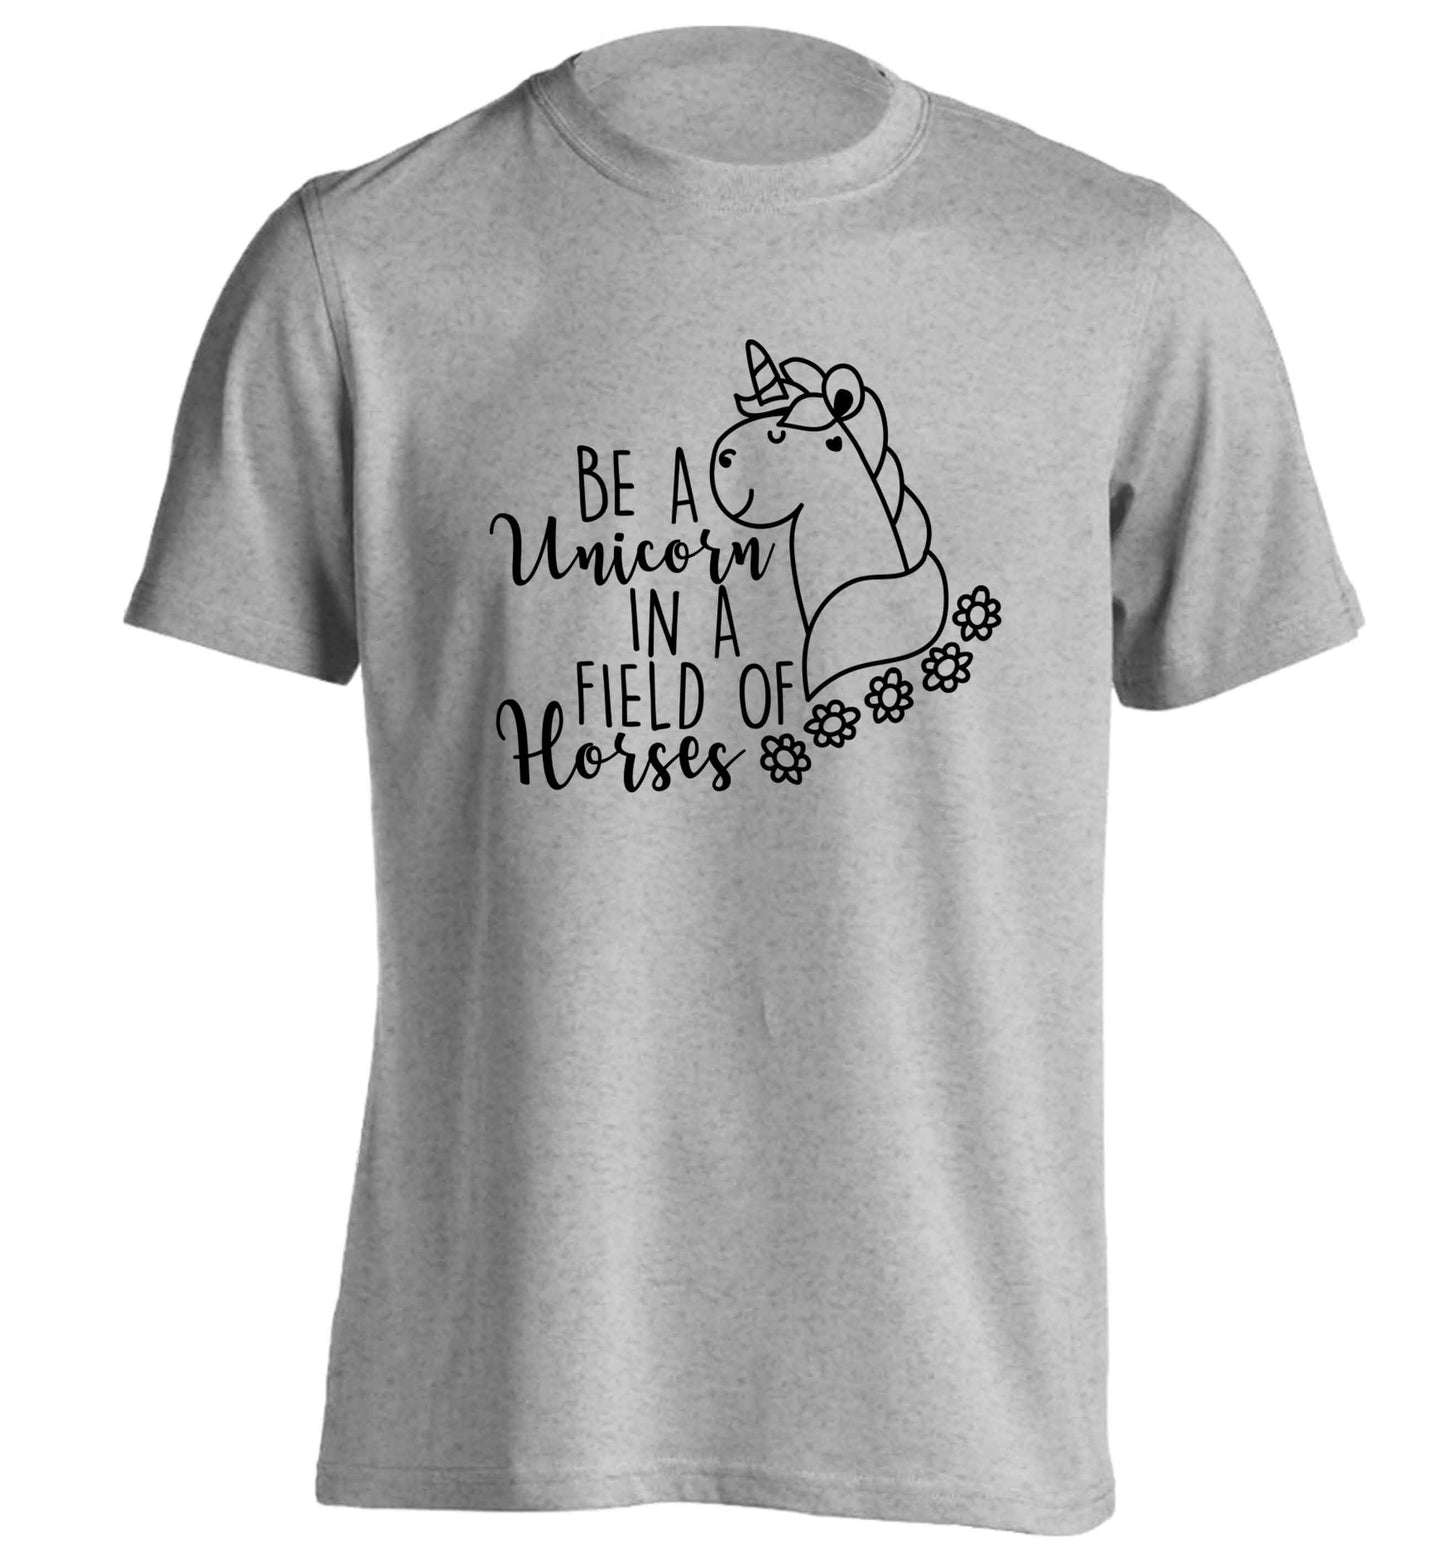 Be a unicorn in a field of horses adults unisex grey Tshirt 2XL